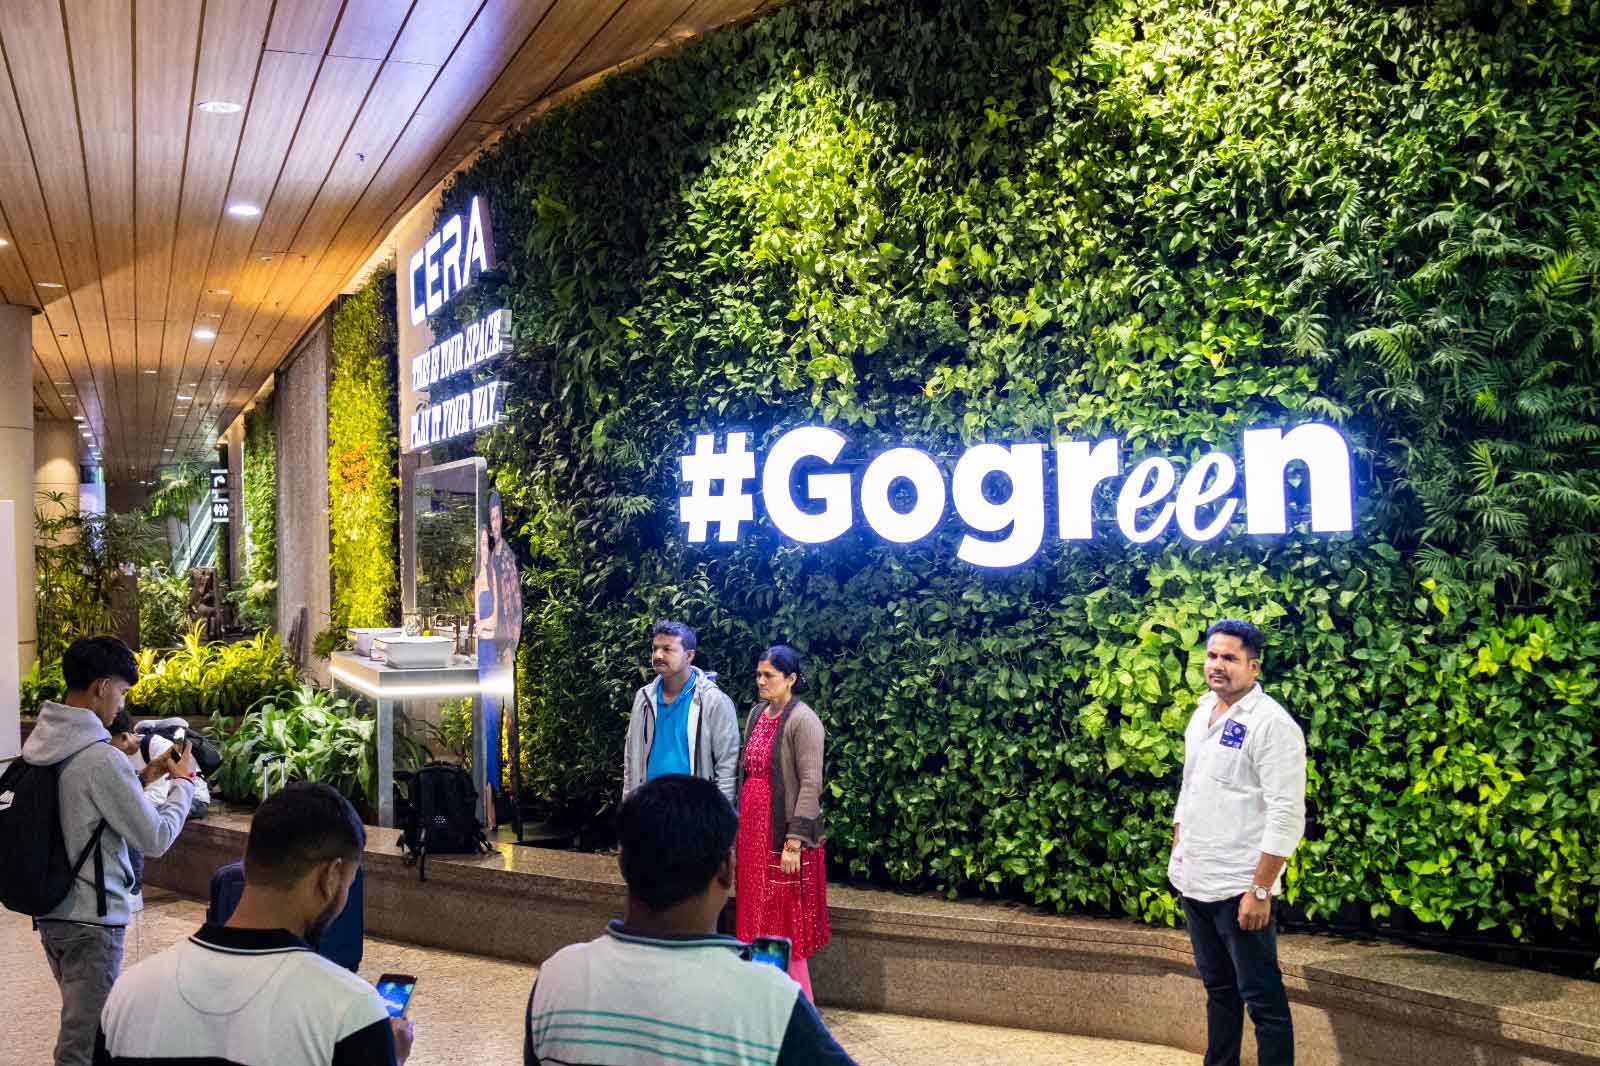 CEAR #gogreen campaign by Madison at Airport